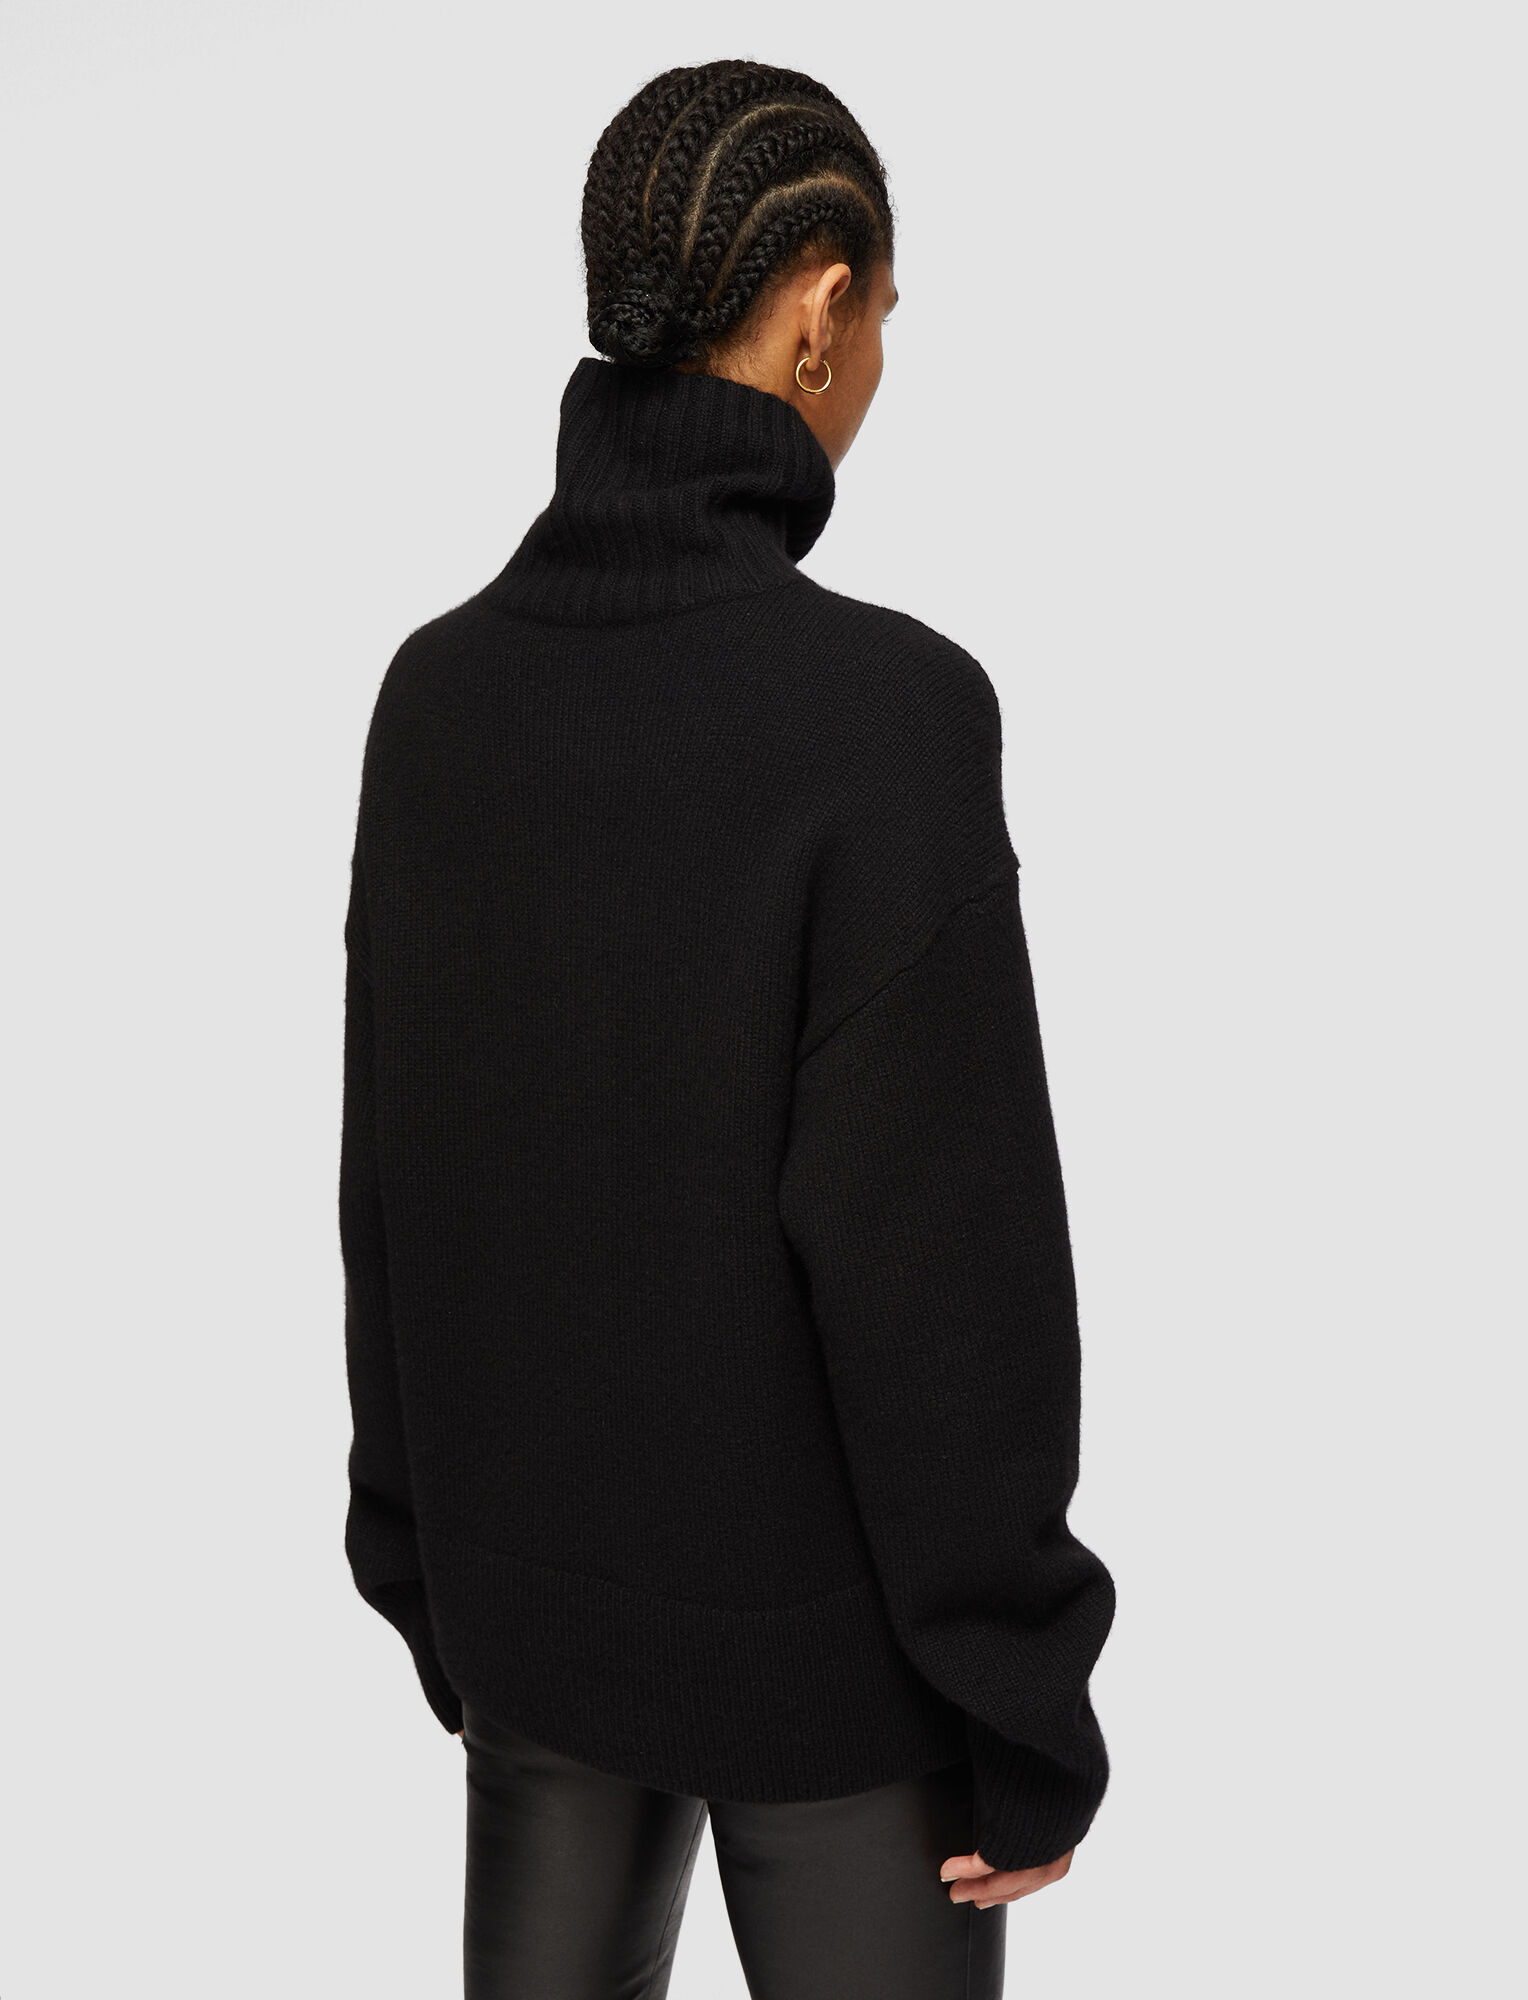 Joseph, High Neck Luxe Cashmere Knit, in Black